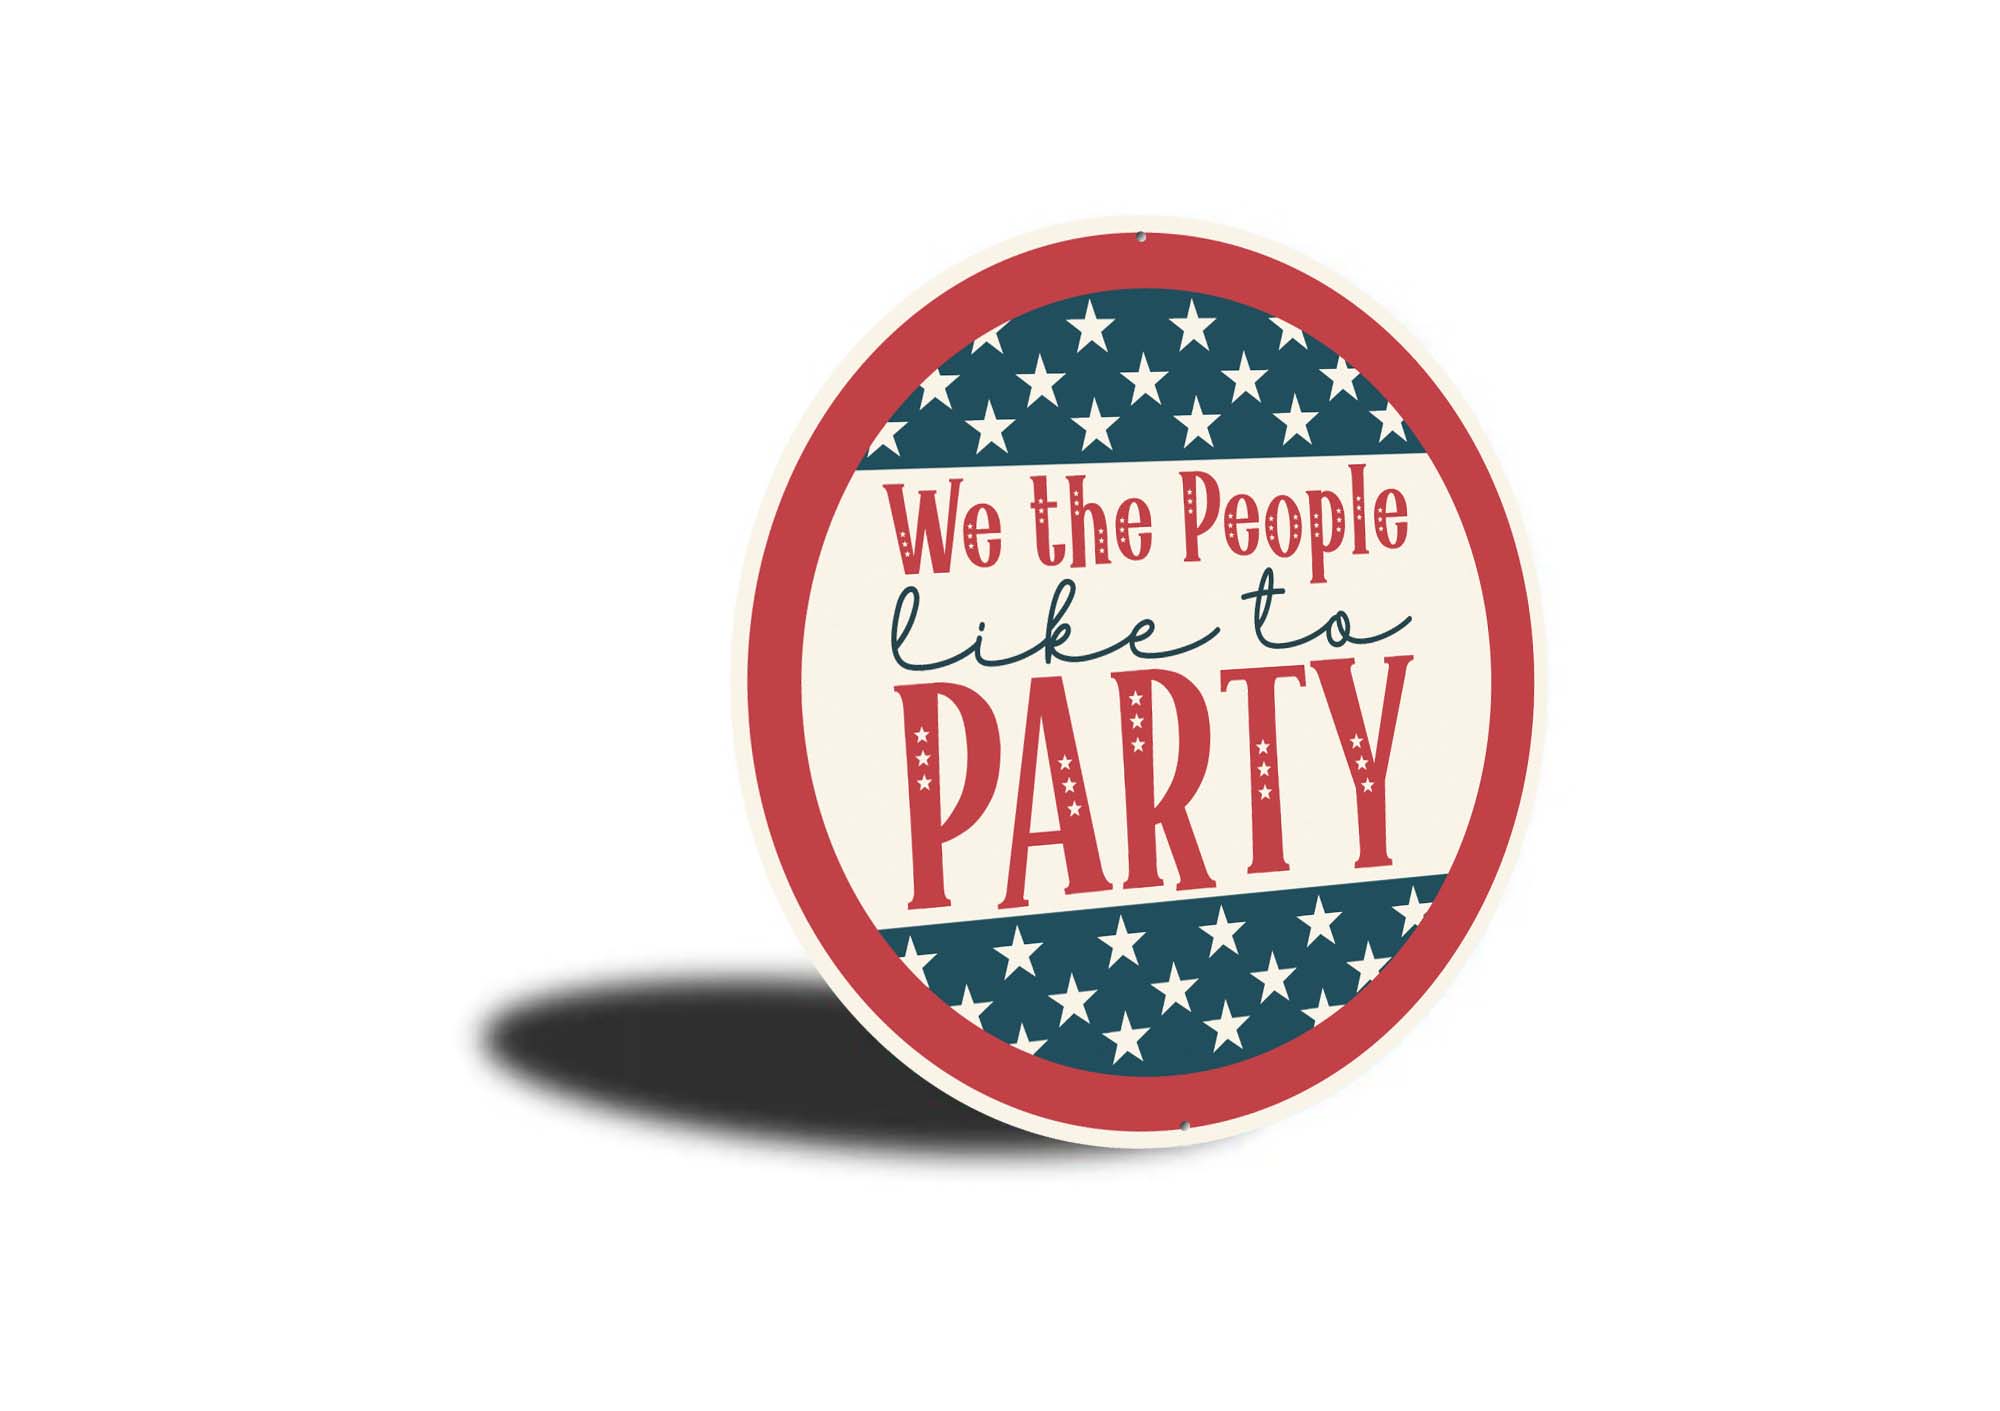 We The People Like To Party Sign